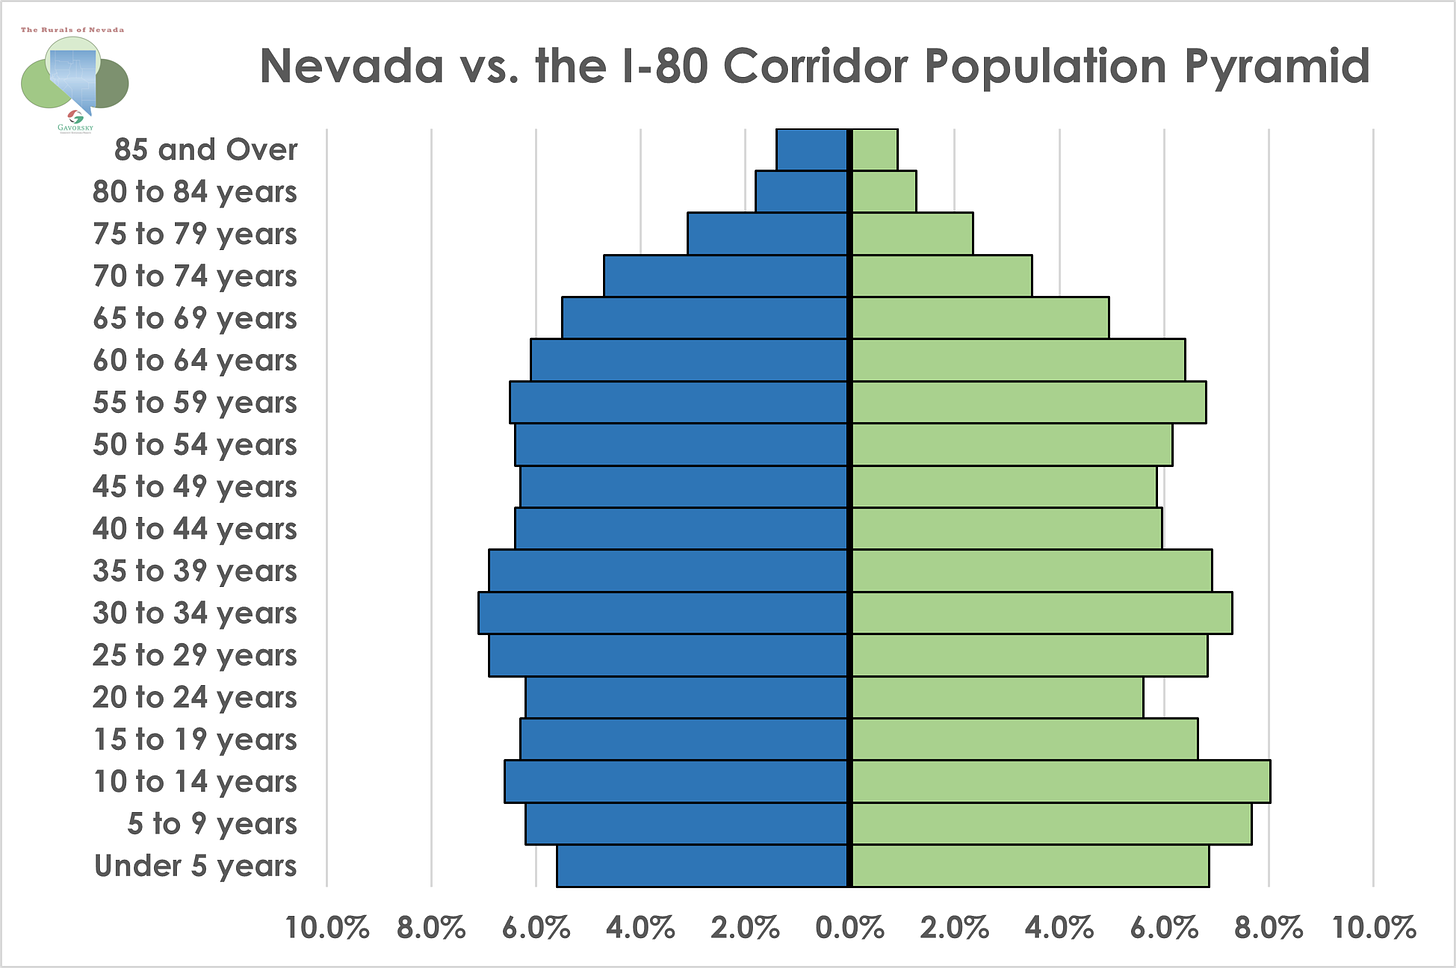 Population Pyramid graph comparing Nevada on left to the I-8p Corridor region on right based on 2020 Census data. Details discussed in paragraphs below.